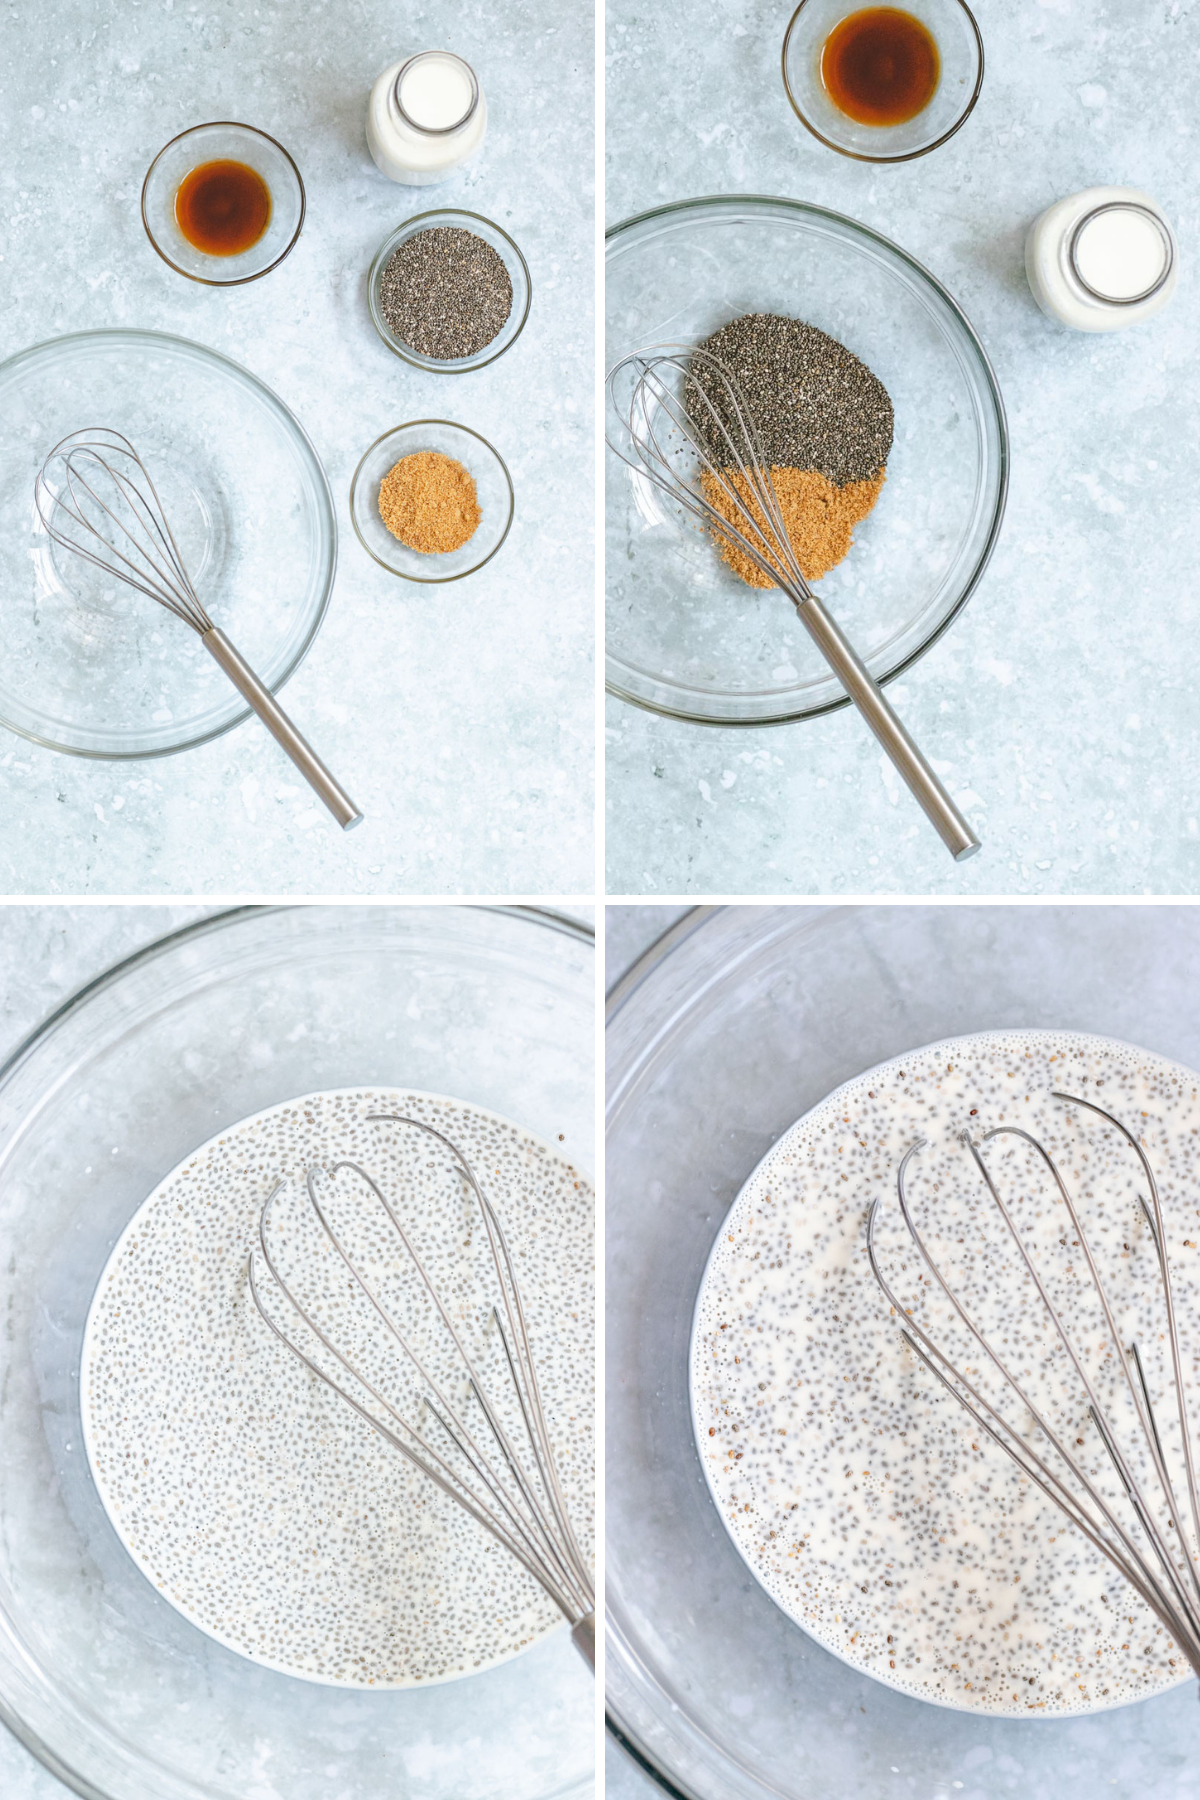 Steps for making the Vanilla Chia Pudding Collage